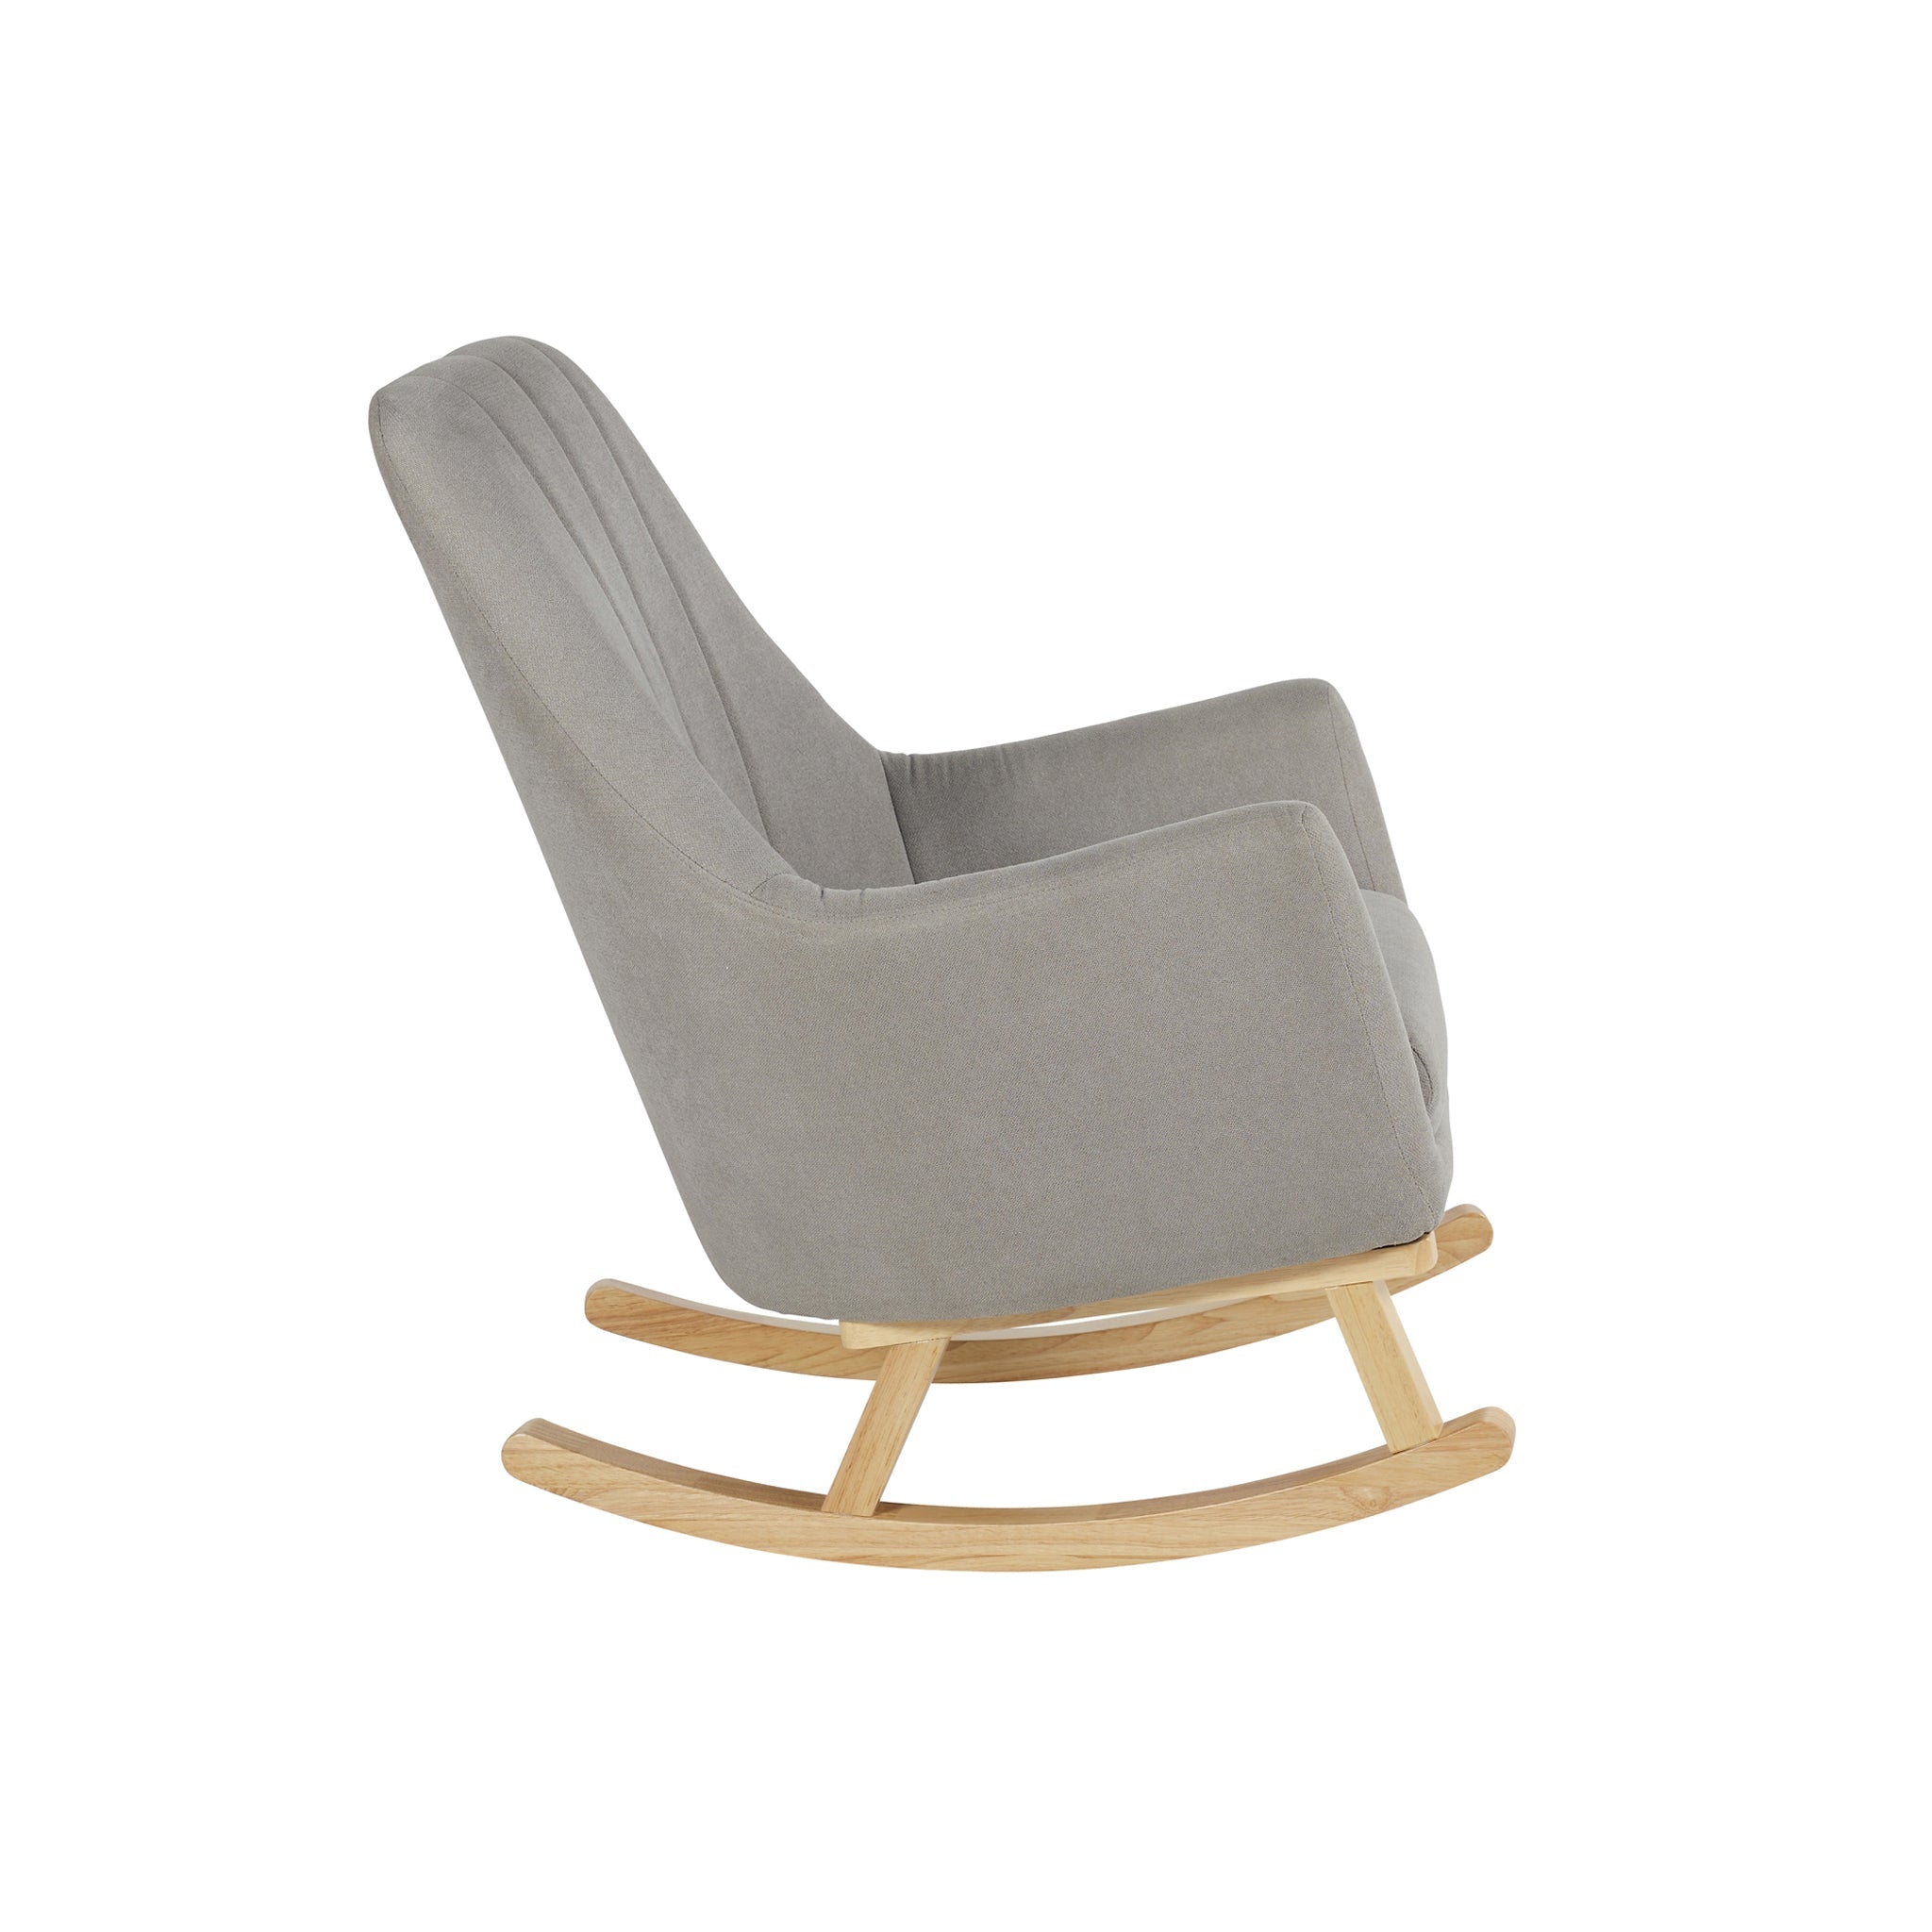 Ickle Bubba Nursing Chairs Ickle Bubba Eden Deluxe Nursery Chair and Stool Pearl Grey 48-008-000-840